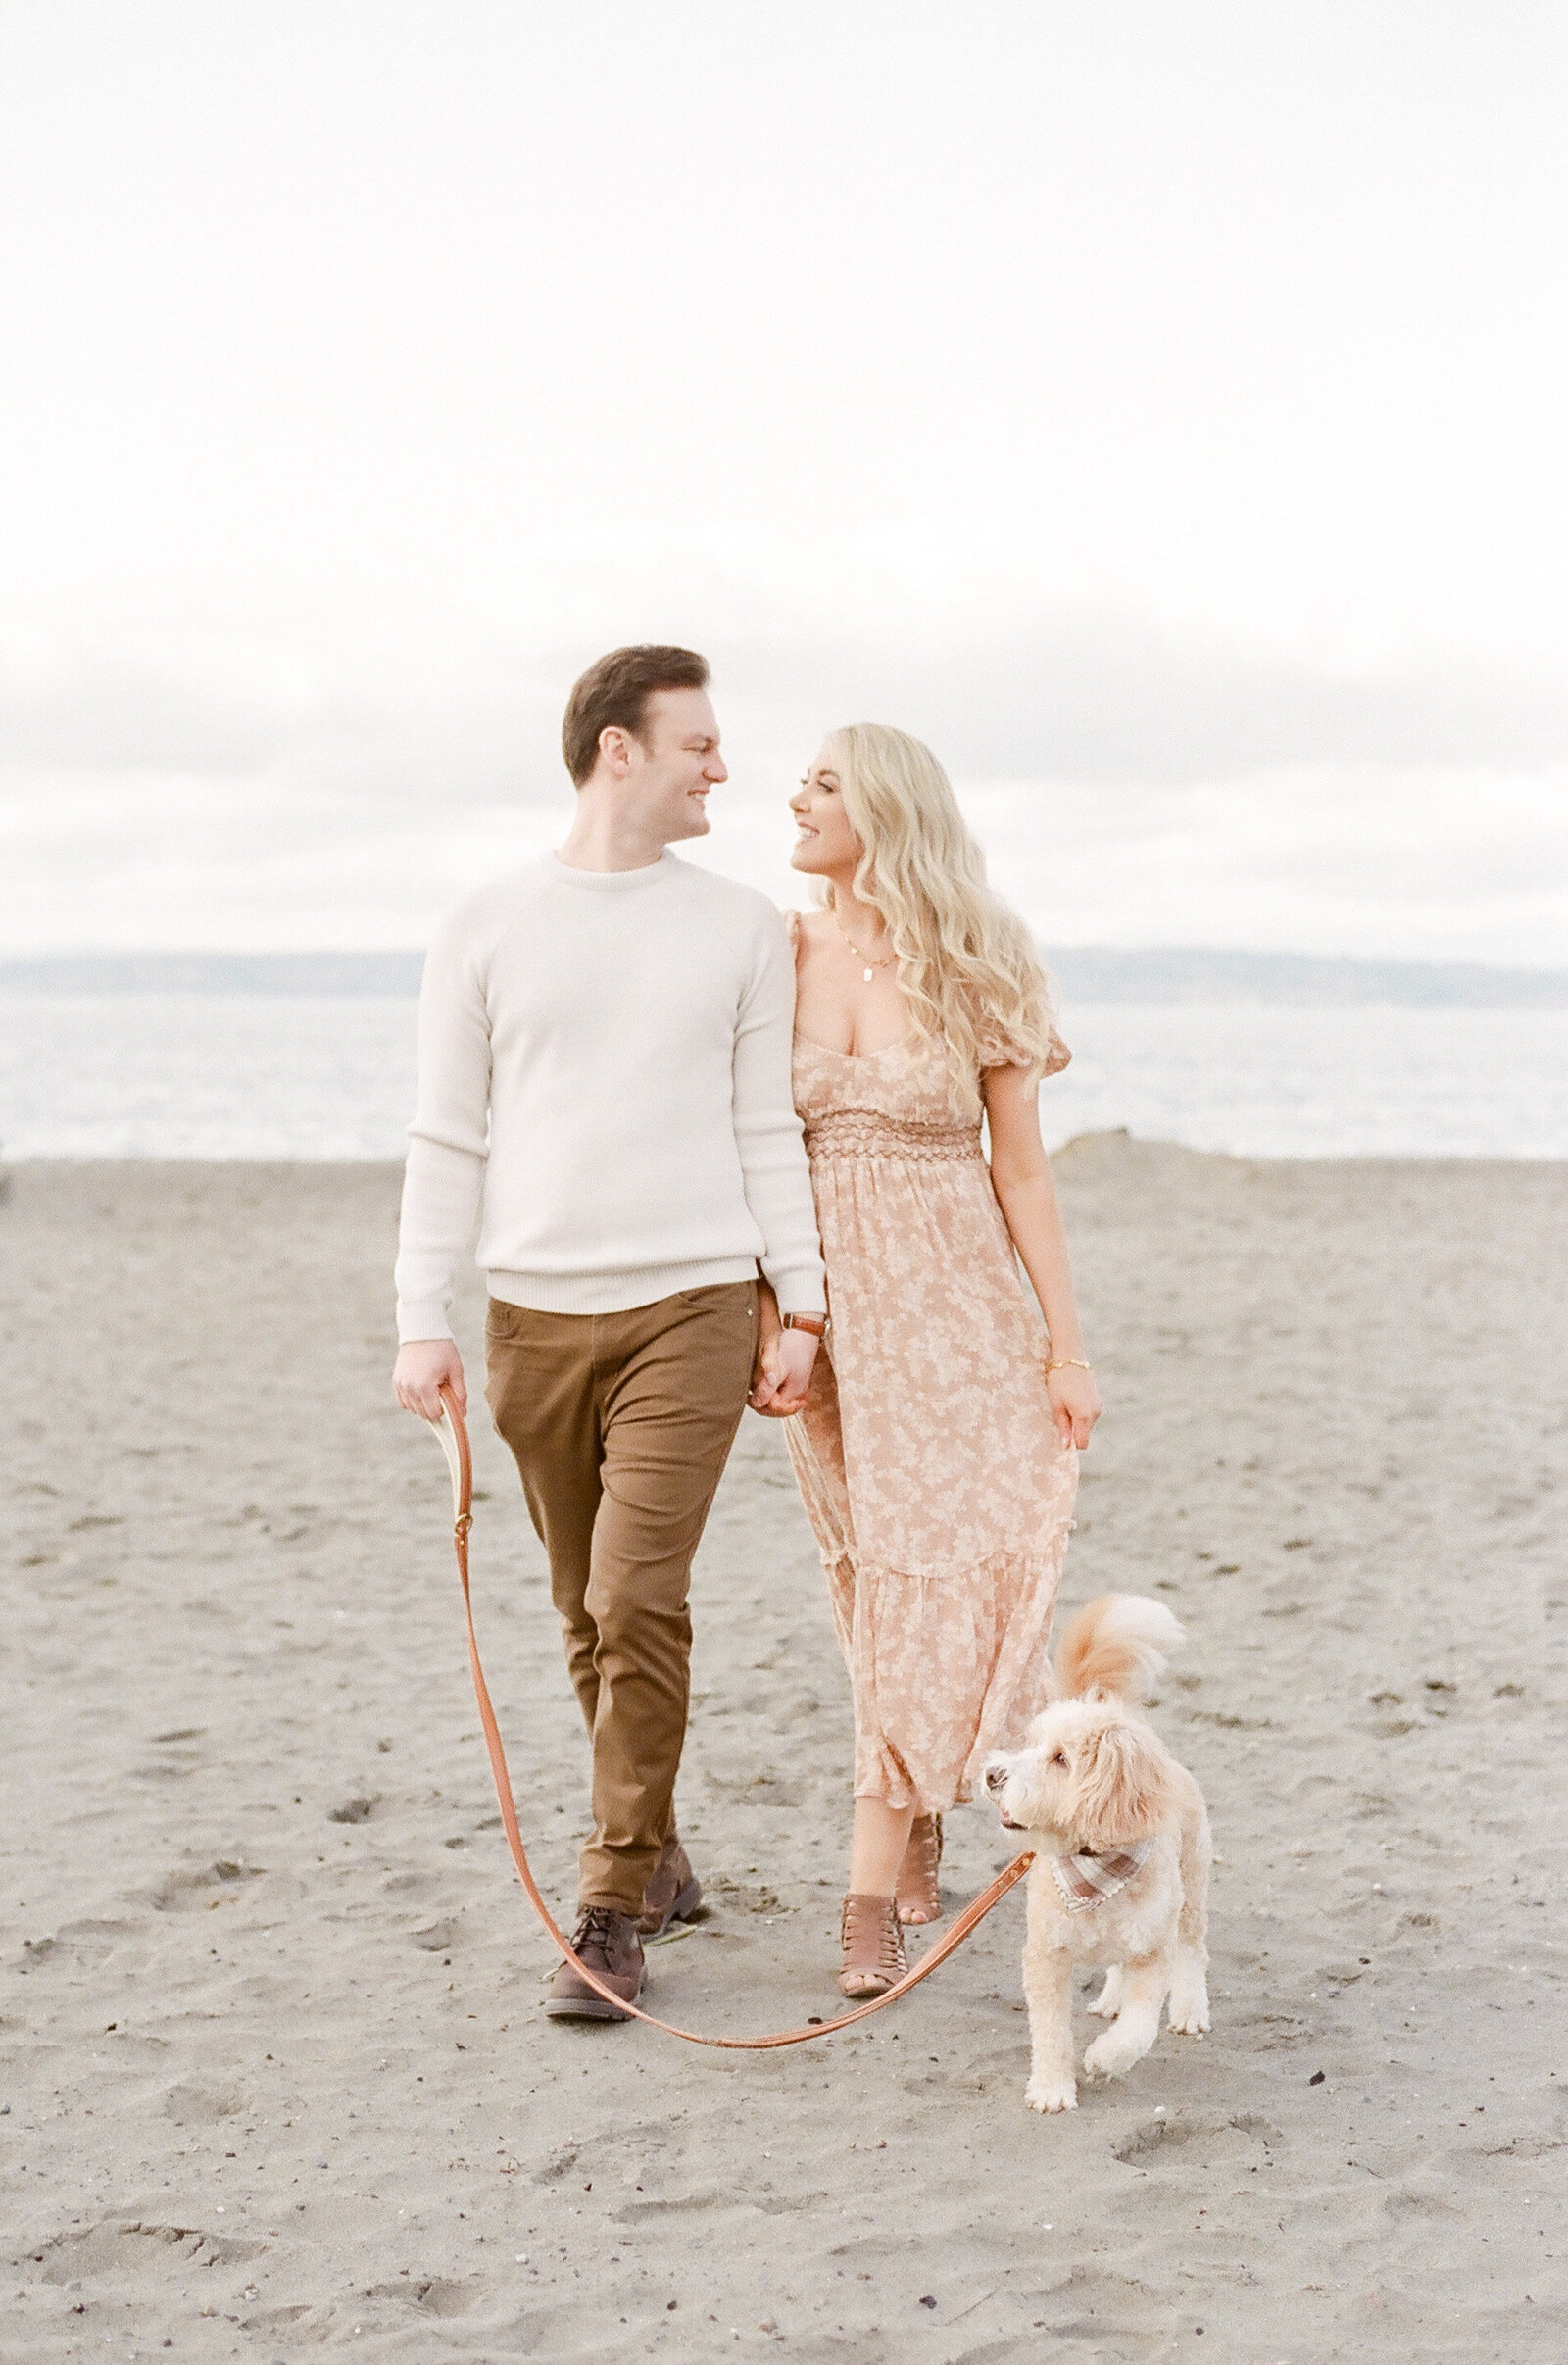 Brittany and Steven - Golden Gardens Park - Kerry Jeanne Photography (88 of 200)